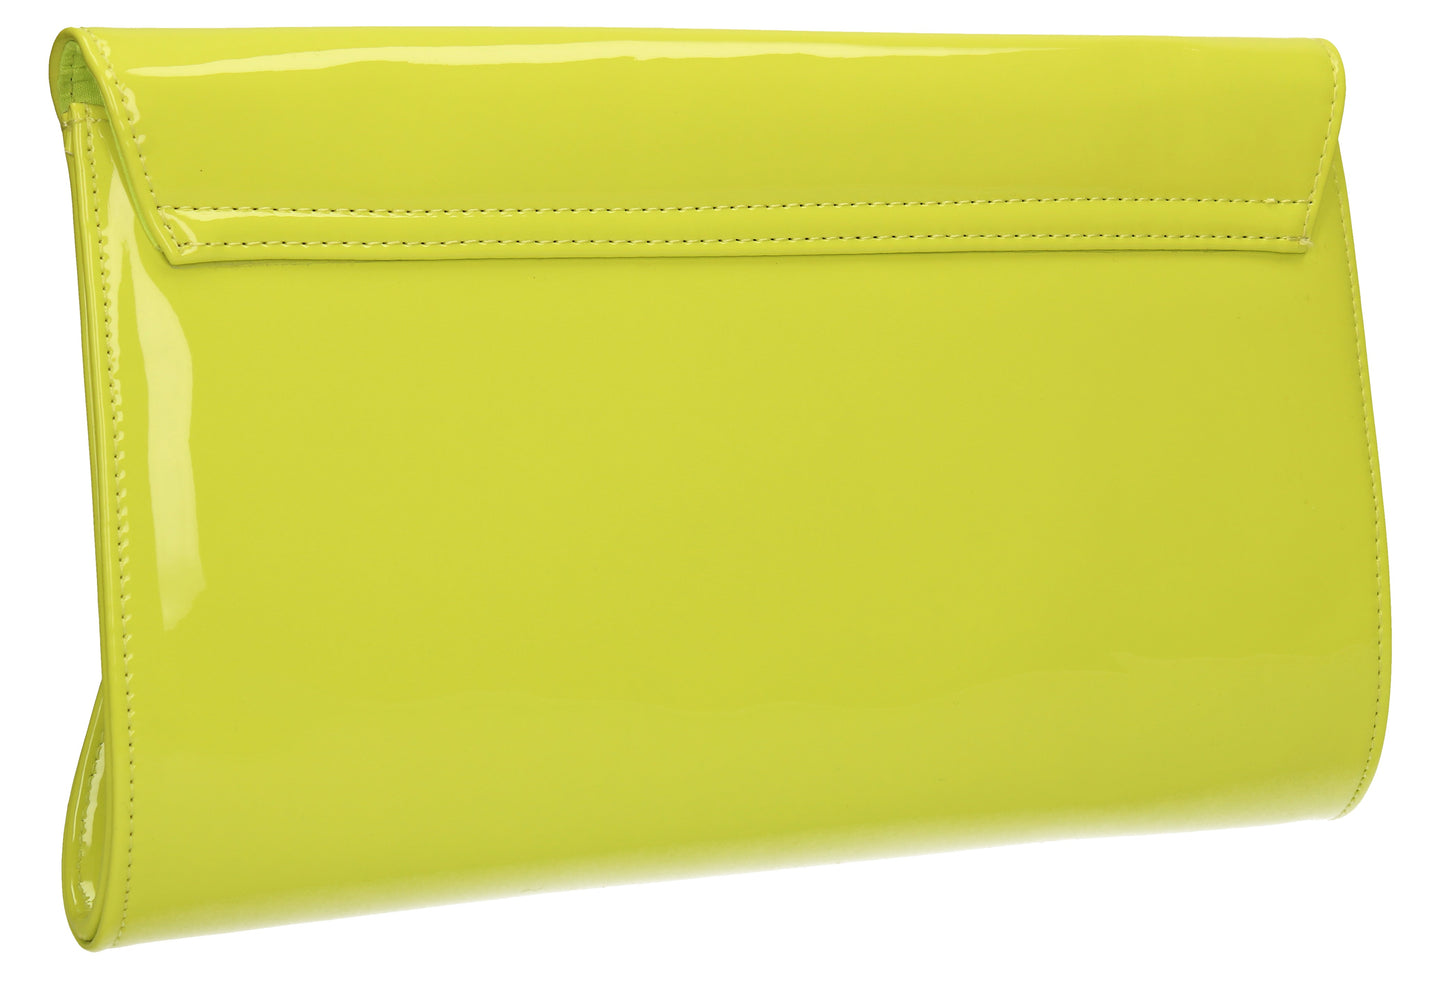 SWANKYSWANS Juliet Patent Envelope Clutch Bag Lime Cute Cheap Clutch Bag For Weddings School and Work